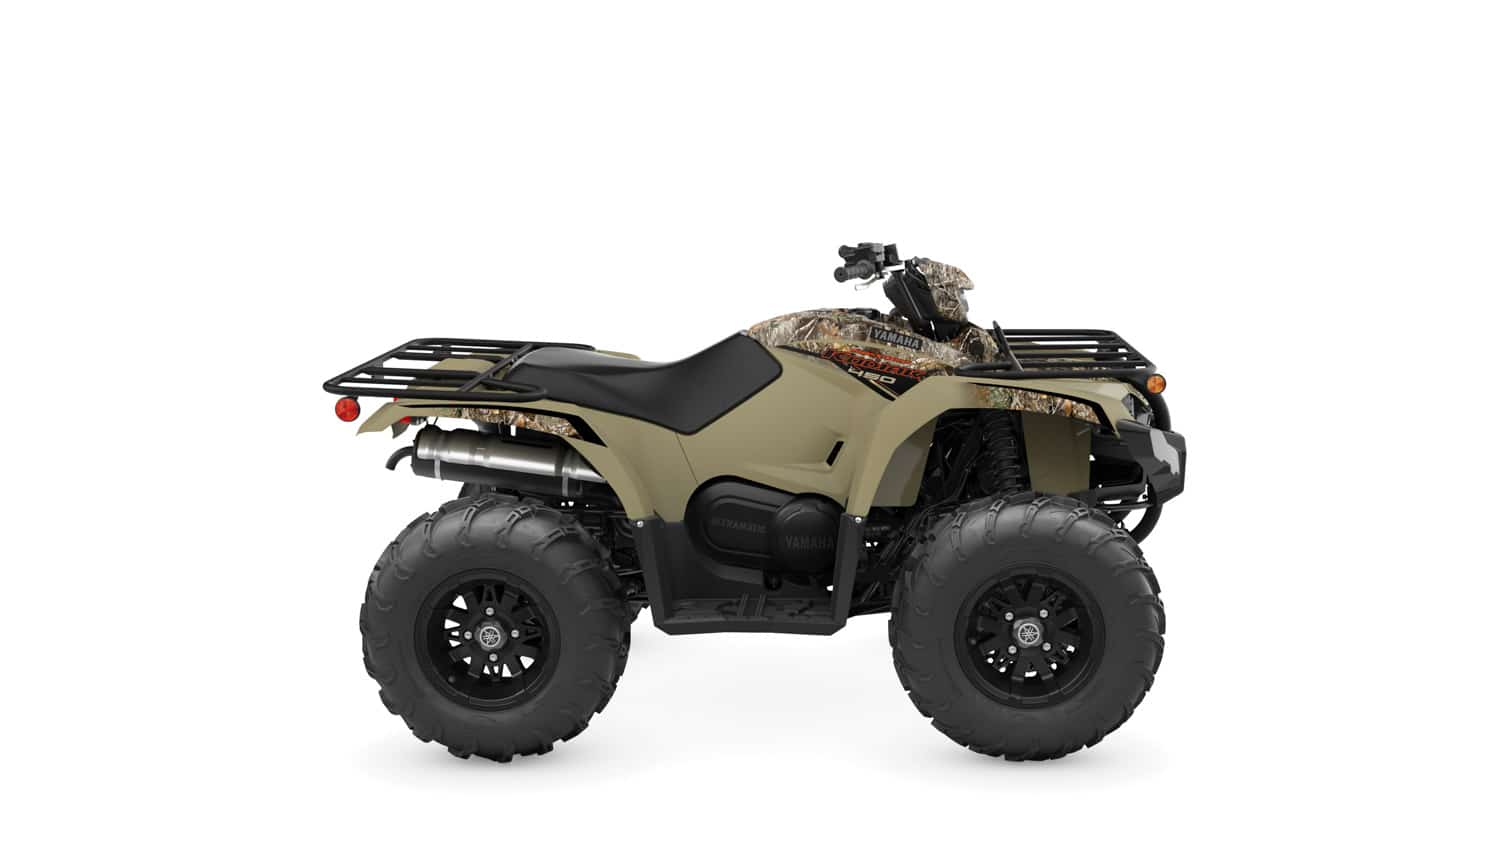 2019 Yamaha Grizzly SE Review - ATV Trail Rider Magazine